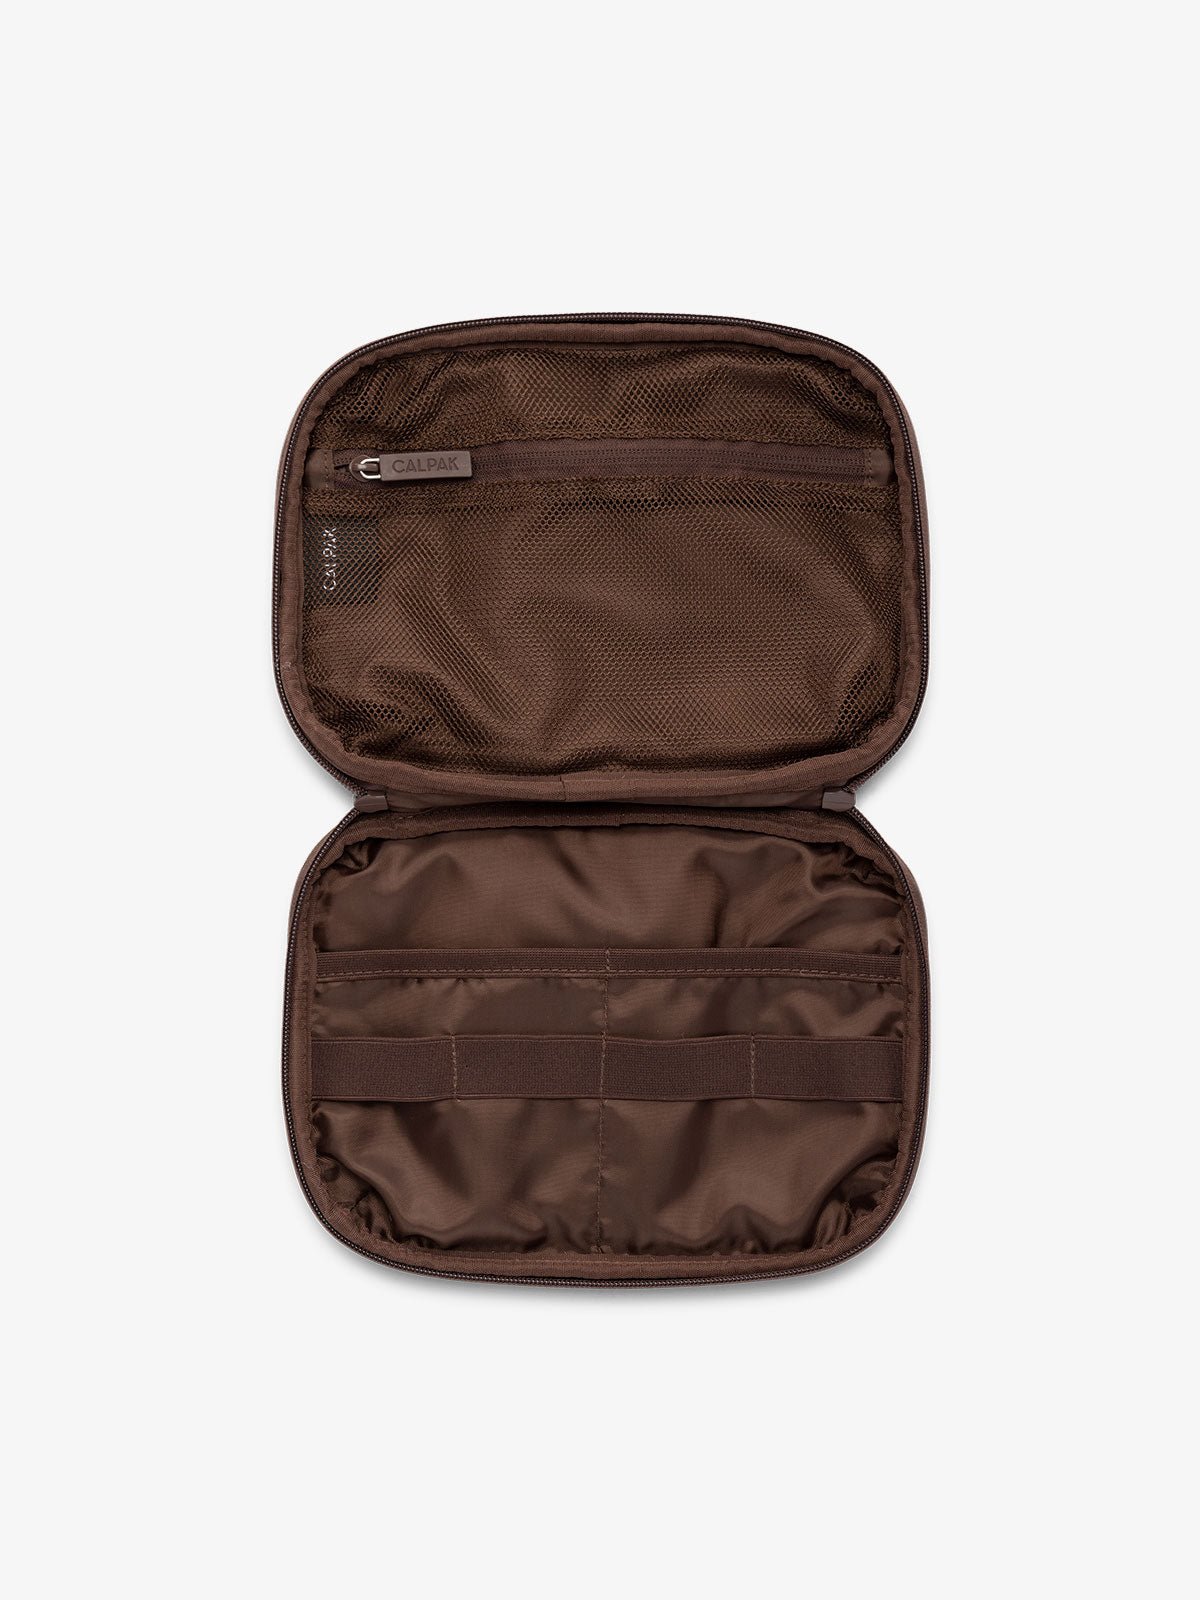 Interior view of tablet organizer in brown with loops and zippered pockets for organizing electronics and belongings